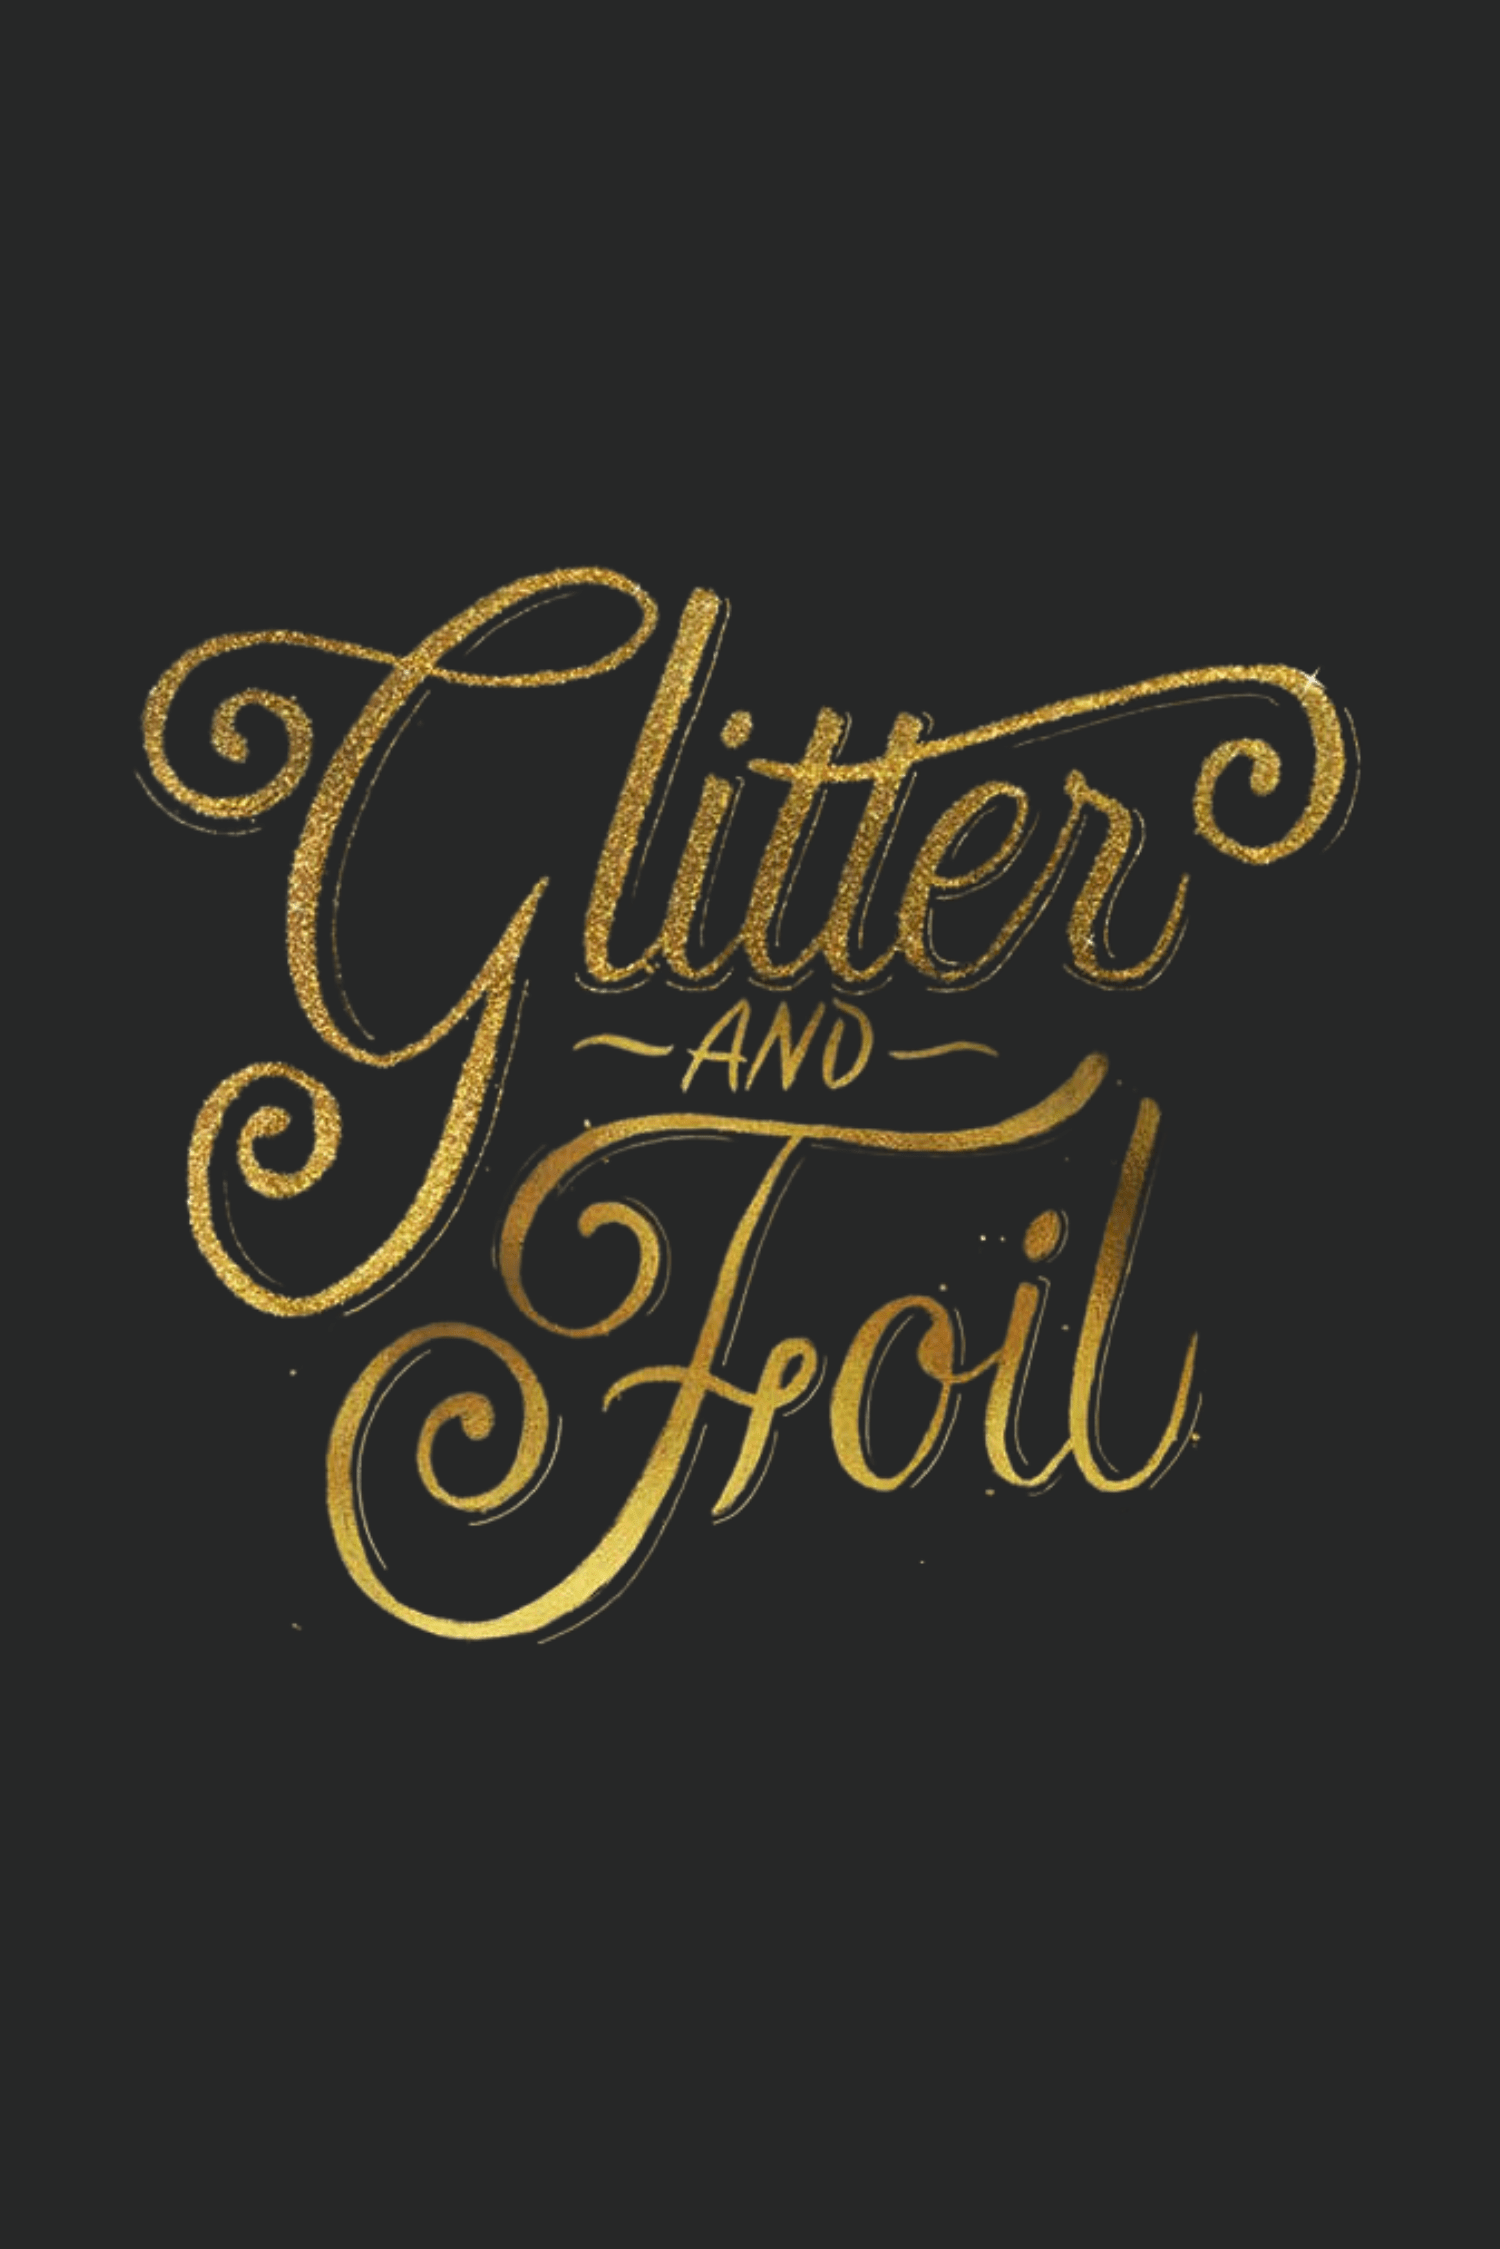 Glitter and Foil Toolkit by Ipad Calligraphy